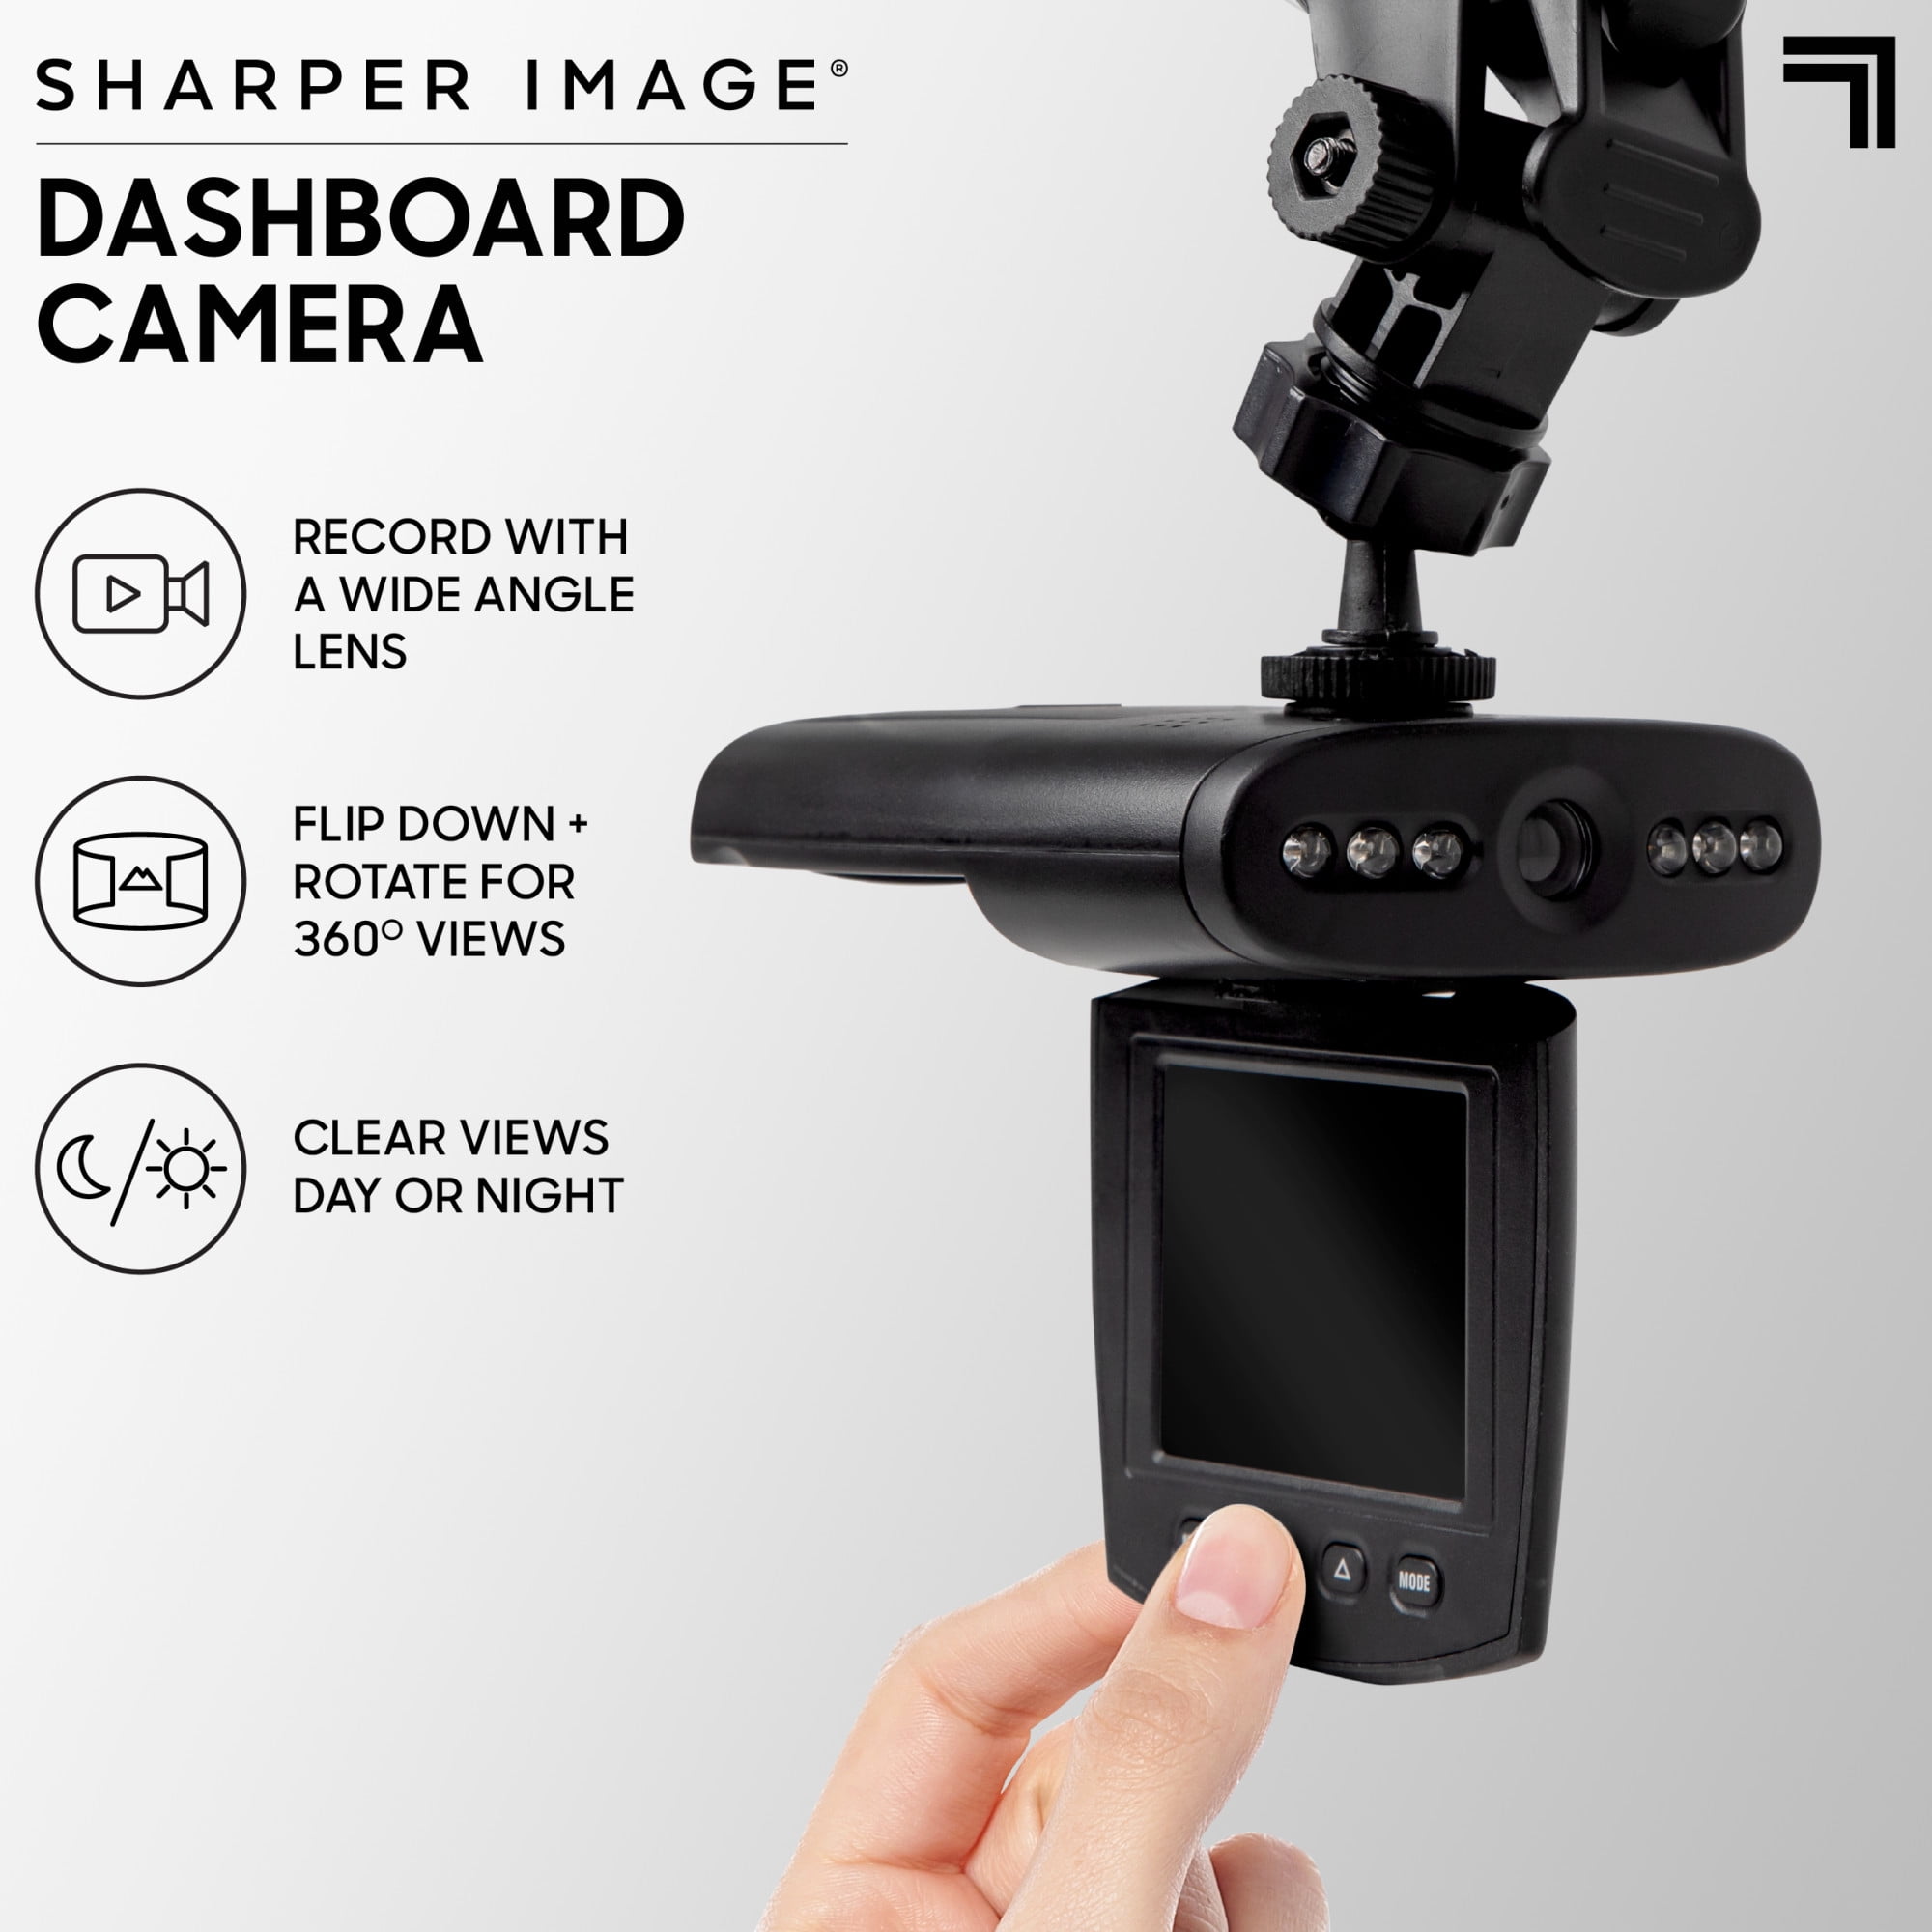 As Seen on TV - Portable HD Video & Audio Recorder Dash Cam Pro -  SharpPrices